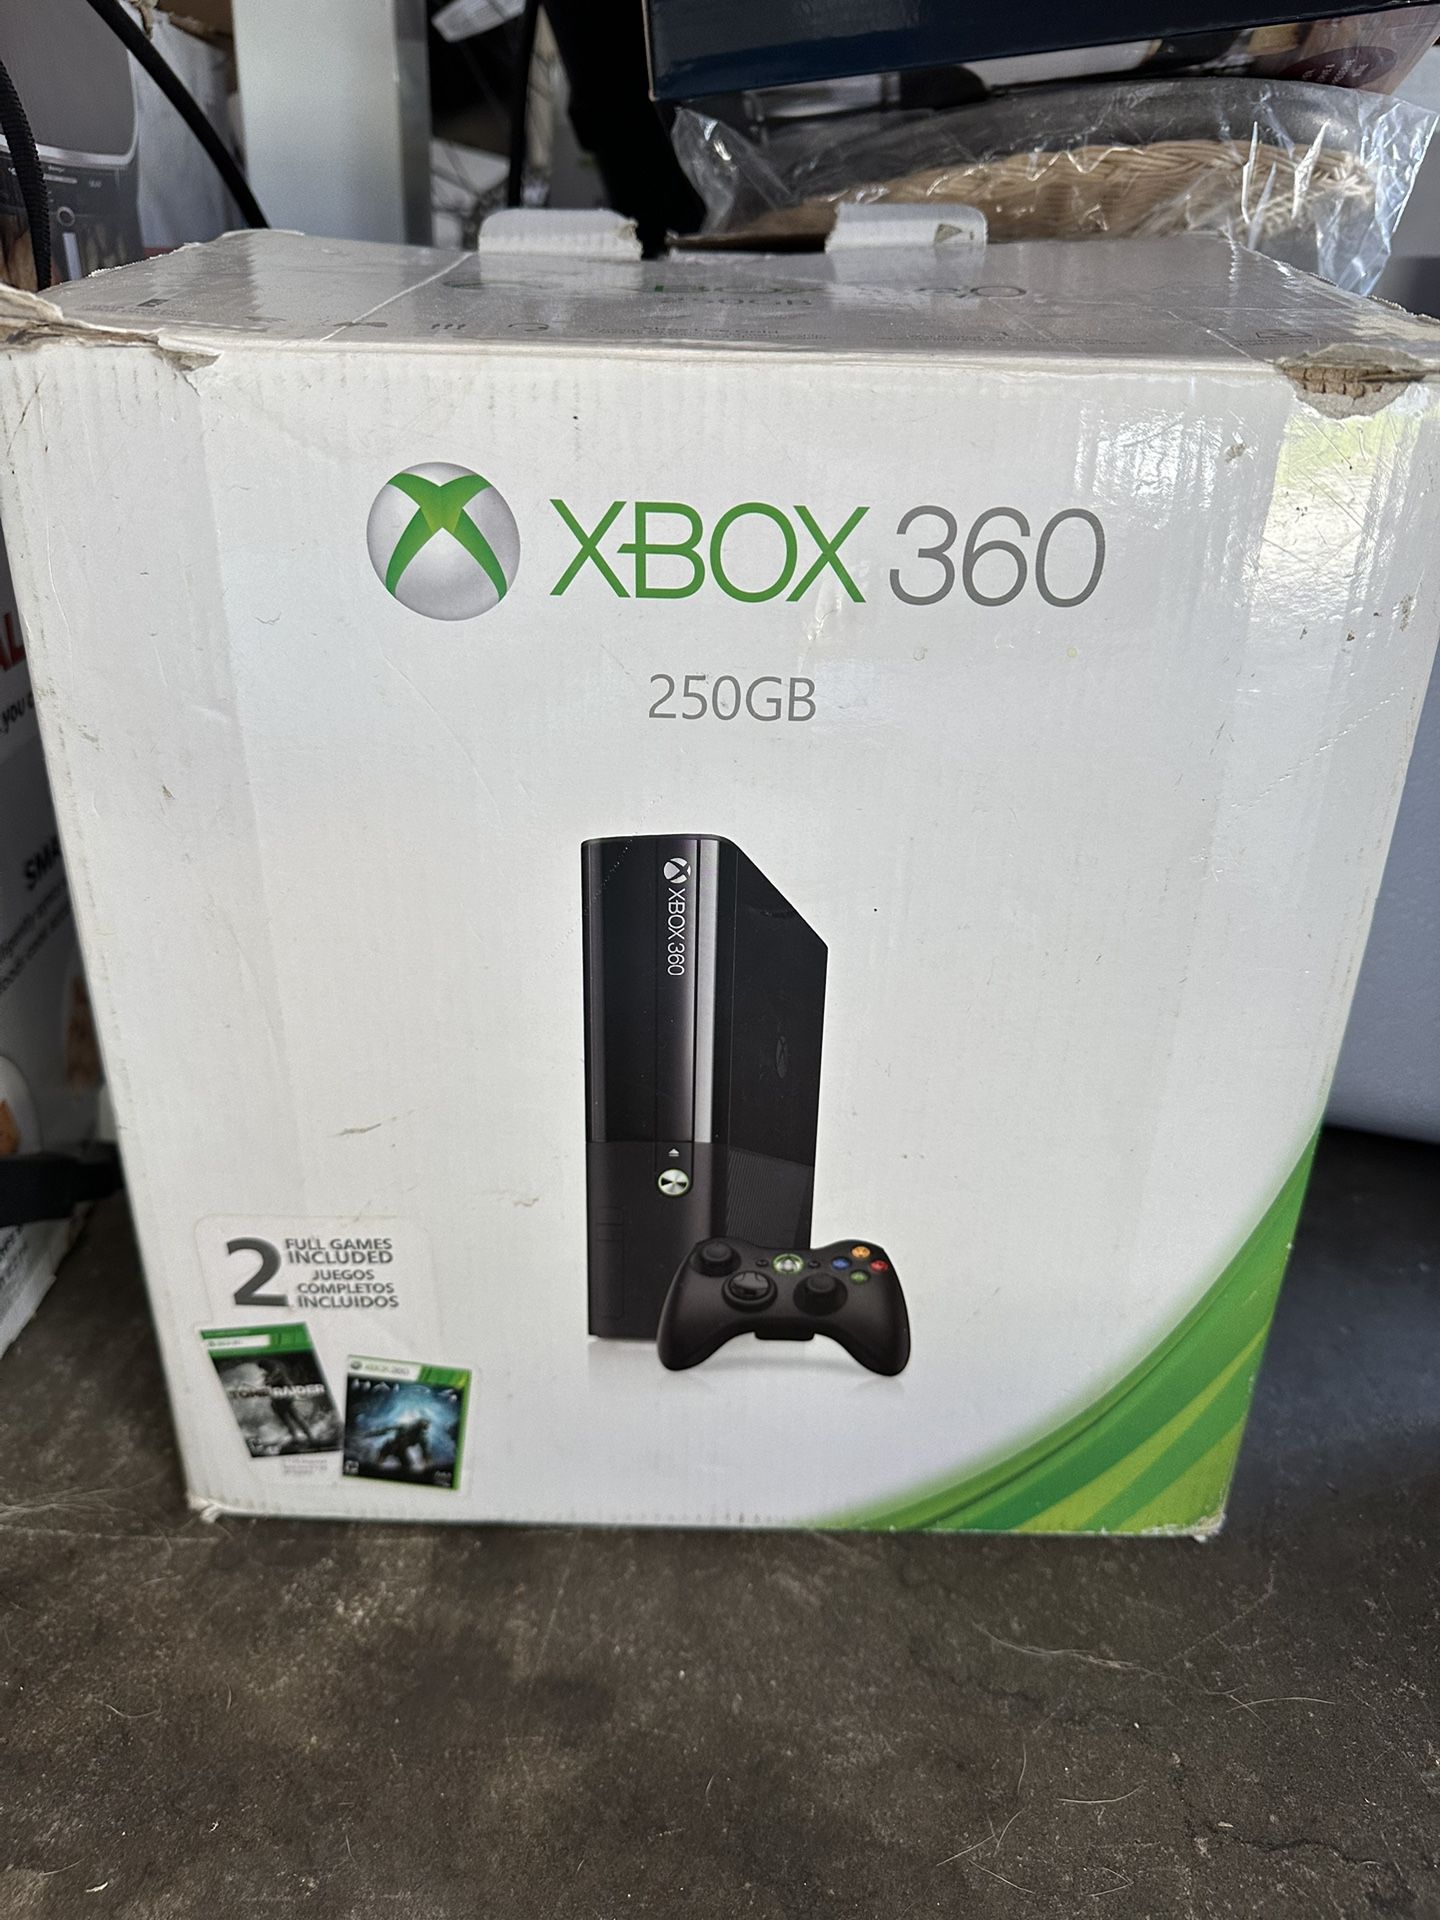 Xbox 360 W/ 2 Controllers